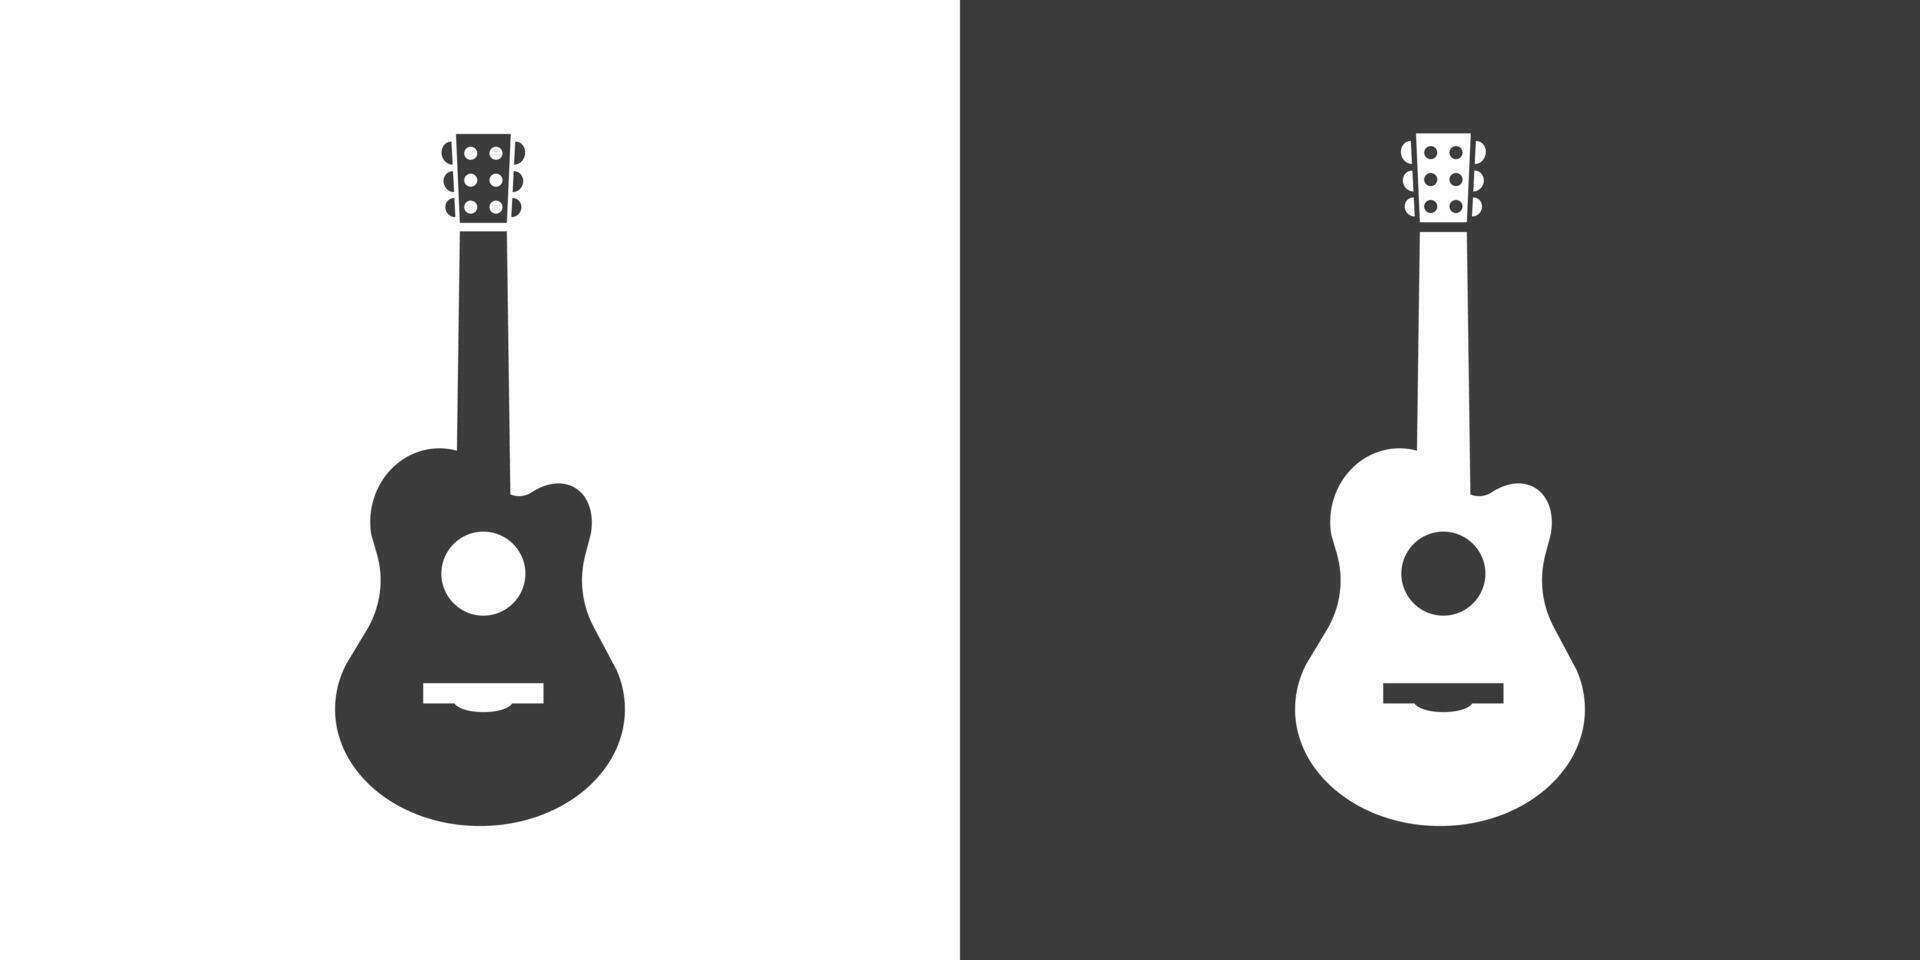 Acoustic guitar icon black and white style. Guitar black icon silhouette on white background and an inverted color on black background. Simple guitar icon for studio web, mobile app, branding vector